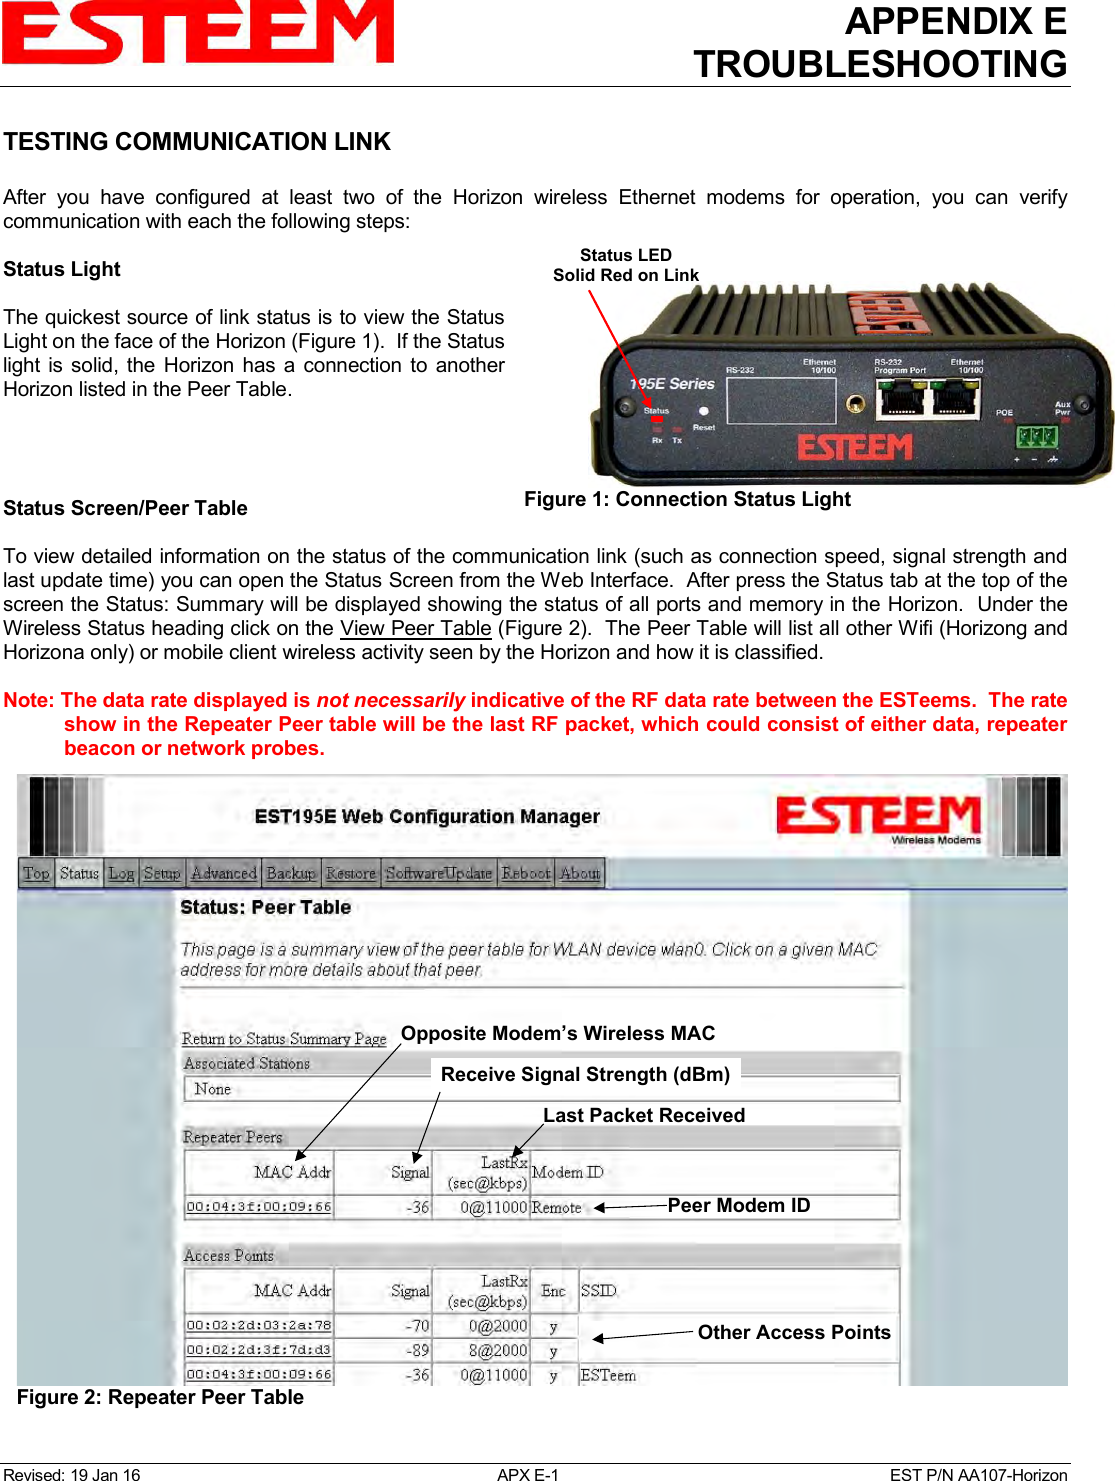 APPENDIX E TROUBLESHOOTING   Revised: 19 Jan 16  APX E-1  EST P/N AA107-Horizon TESTING COMMUNICATION LINK  After  you  have  configured  at  least  two  of  the  Horizon  wireless  Ethernet  modems  for  operation,  you  can  verify communication with each the following steps:  Status Light  The quickest source of link status is to view the Status Light on the face of the Horizon (Figure 1).  If the Status light  is solid,  the  Horizon  has a connection to another Horizon listed in the Peer Table.     Status Screen/Peer Table   To view detailed information on the status of the communication link (such as connection speed, signal strength and last update time) you can open the Status Screen from the Web Interface.  After press the Status tab at the top of the screen the Status: Summary will be displayed showing the status of all ports and memory in the Horizon.  Under the Wireless Status heading click on the View Peer Table (Figure 2).  The Peer Table will list all other Wifi (Horizong and Horizona only) or mobile client wireless activity seen by the Horizon and how it is classified.    Note: The data rate displayed is not necessarily indicative of the RF data rate between the ESTeems.  The rate show in the Repeater Peer table will be the last RF packet, which could consist of either data, repeater beacon or network probes.  Figure 1: Connection Status Light  Figure 2: Repeater Peer Table  Status LEDSolid Red on LinkOpposite Modem’s Wireless MACReceive Signal Strength (dBm)Last Packet ReceivedPeer Modem IDOther Access Points